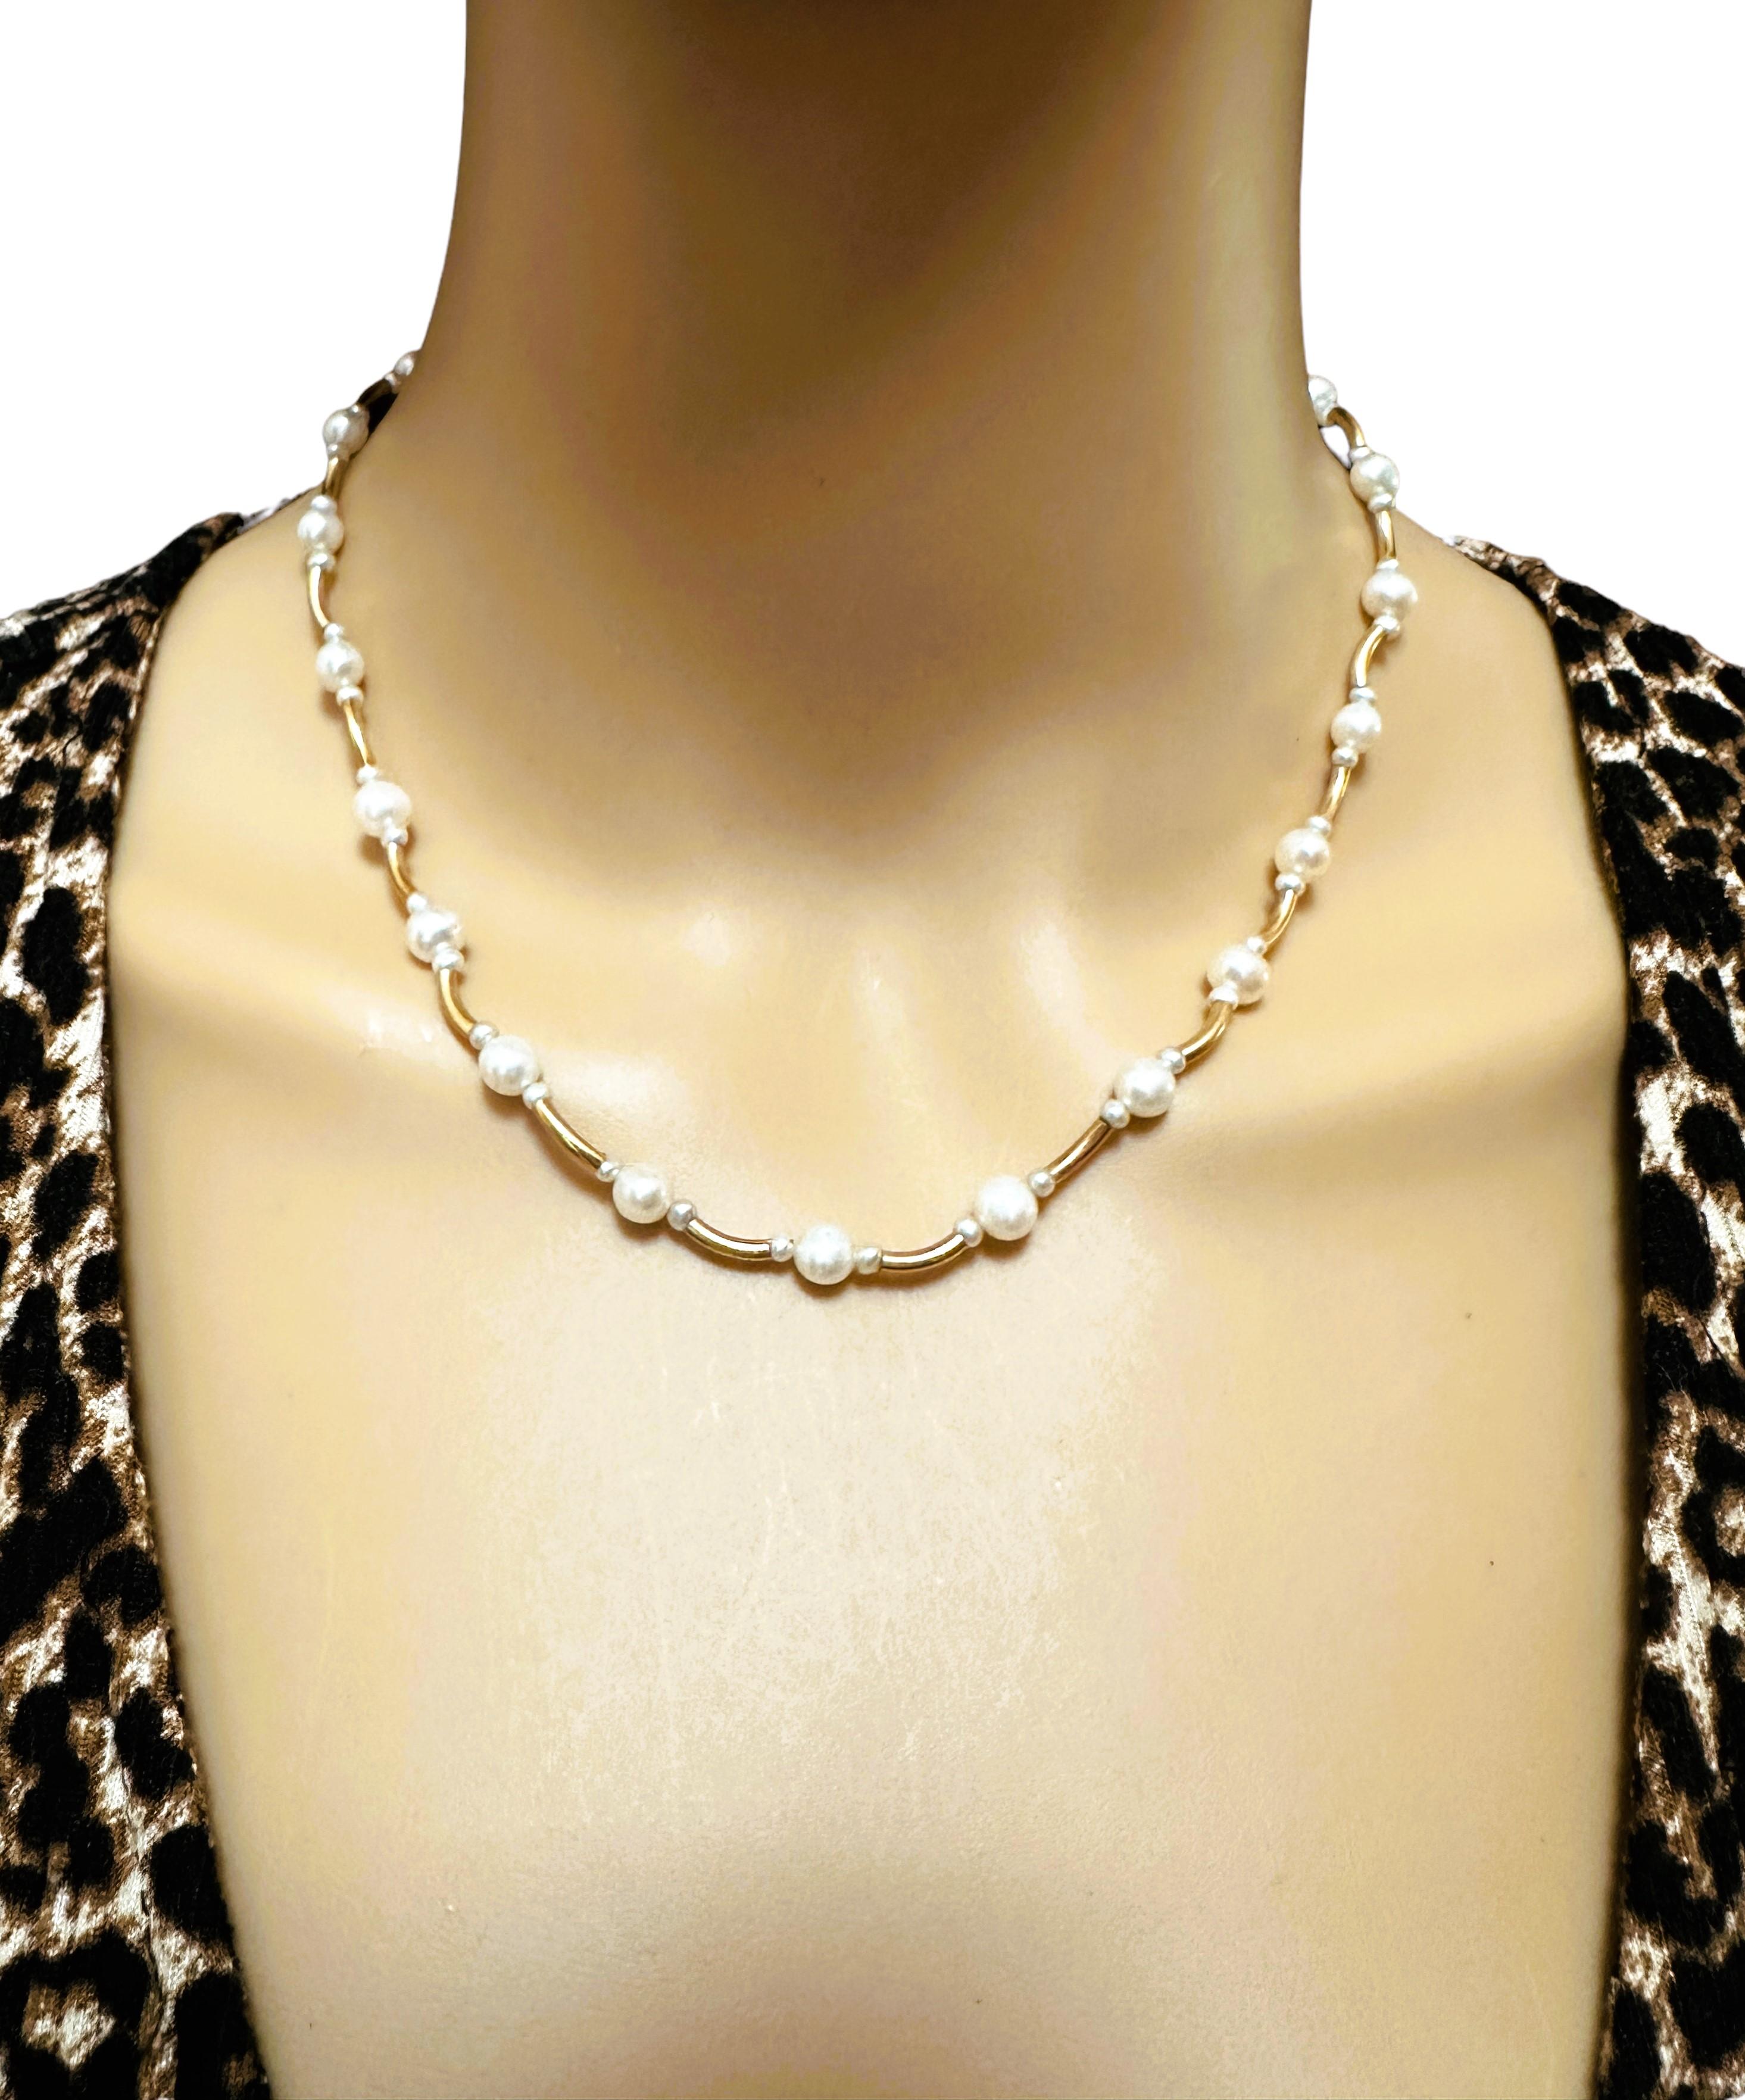 What a beautiful elegant necklace.  You can dress it up or down.  It has 14k Gold curved spacers in between the pearls which makes this necklace special.  Each 5.5m is flanked by a smaller pearl measuring 3 mm.  It has a 3 inch extender and can go